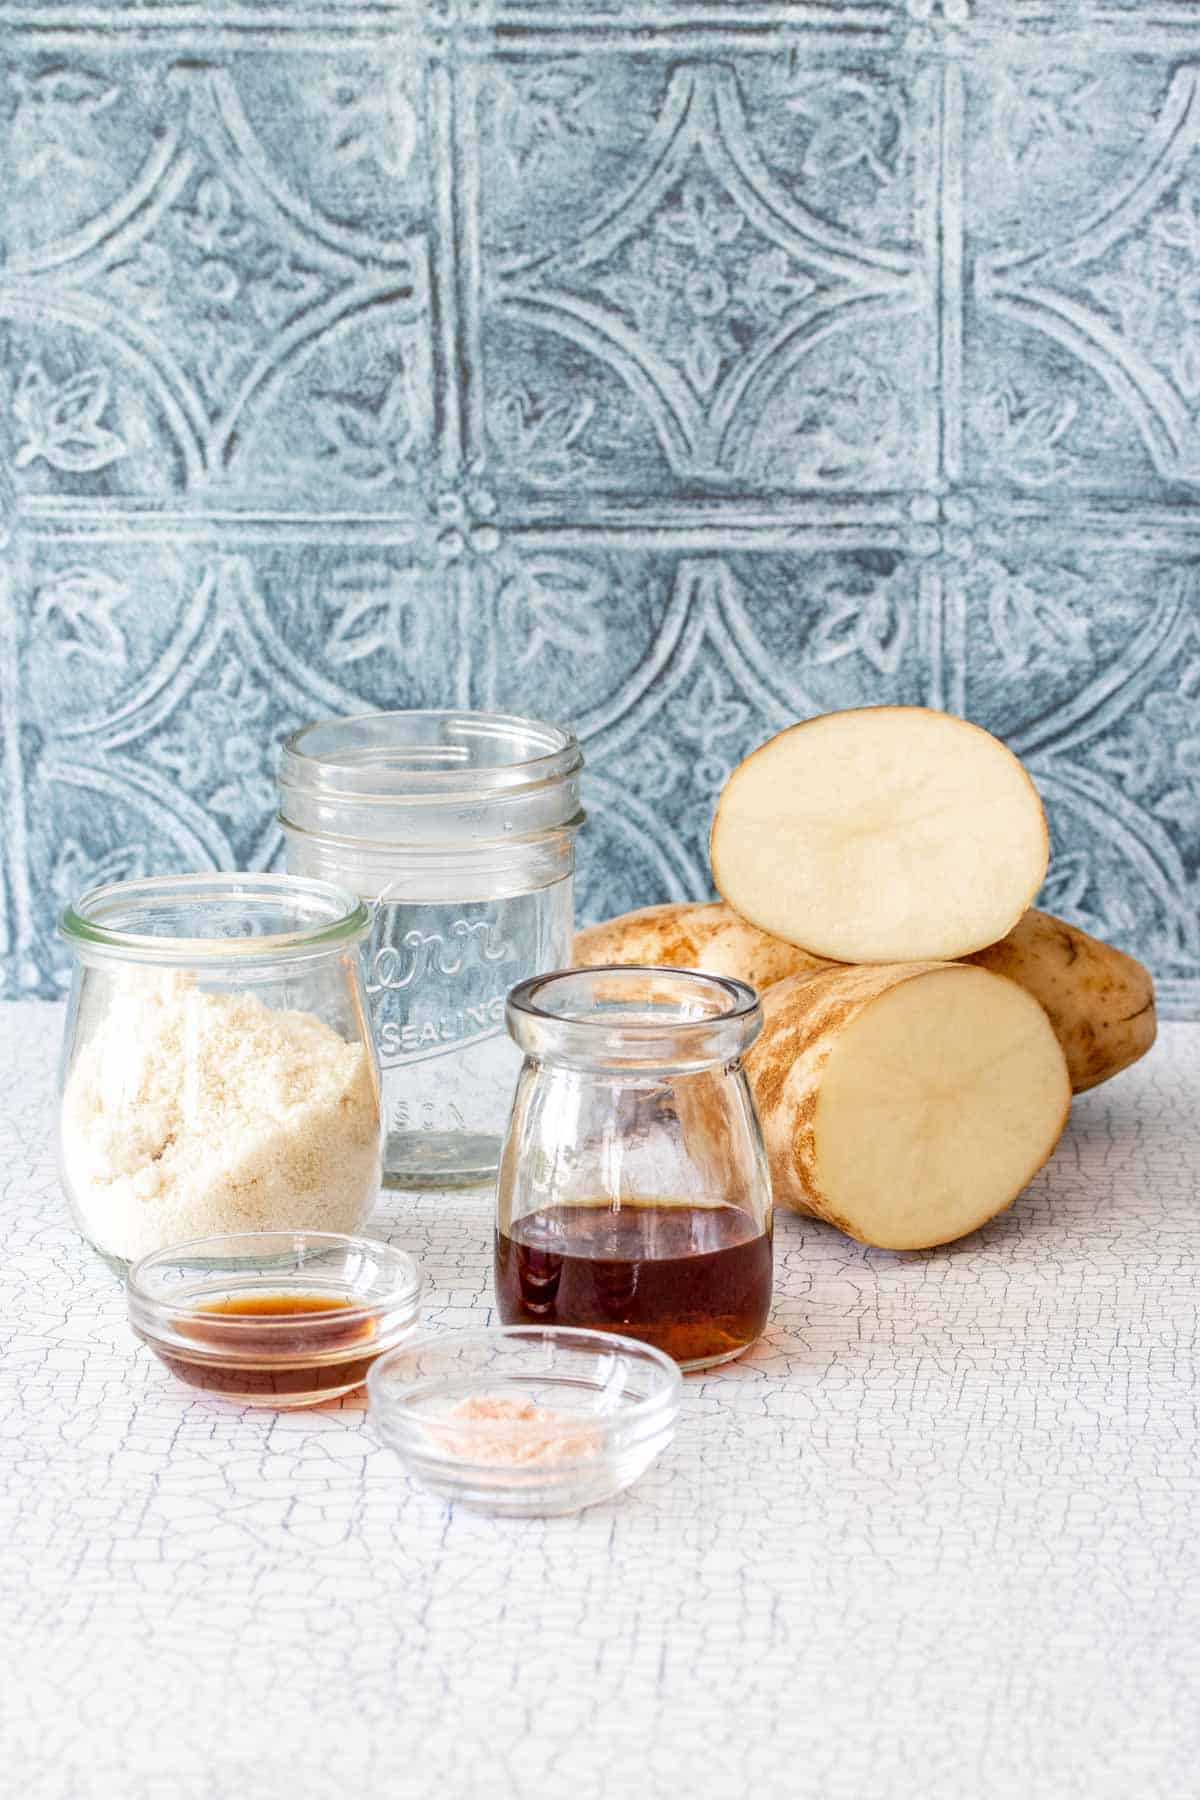 Potatoes and glass containers of flour, water, maple syrup, salt and vanilla on a white surface with a blue tile background